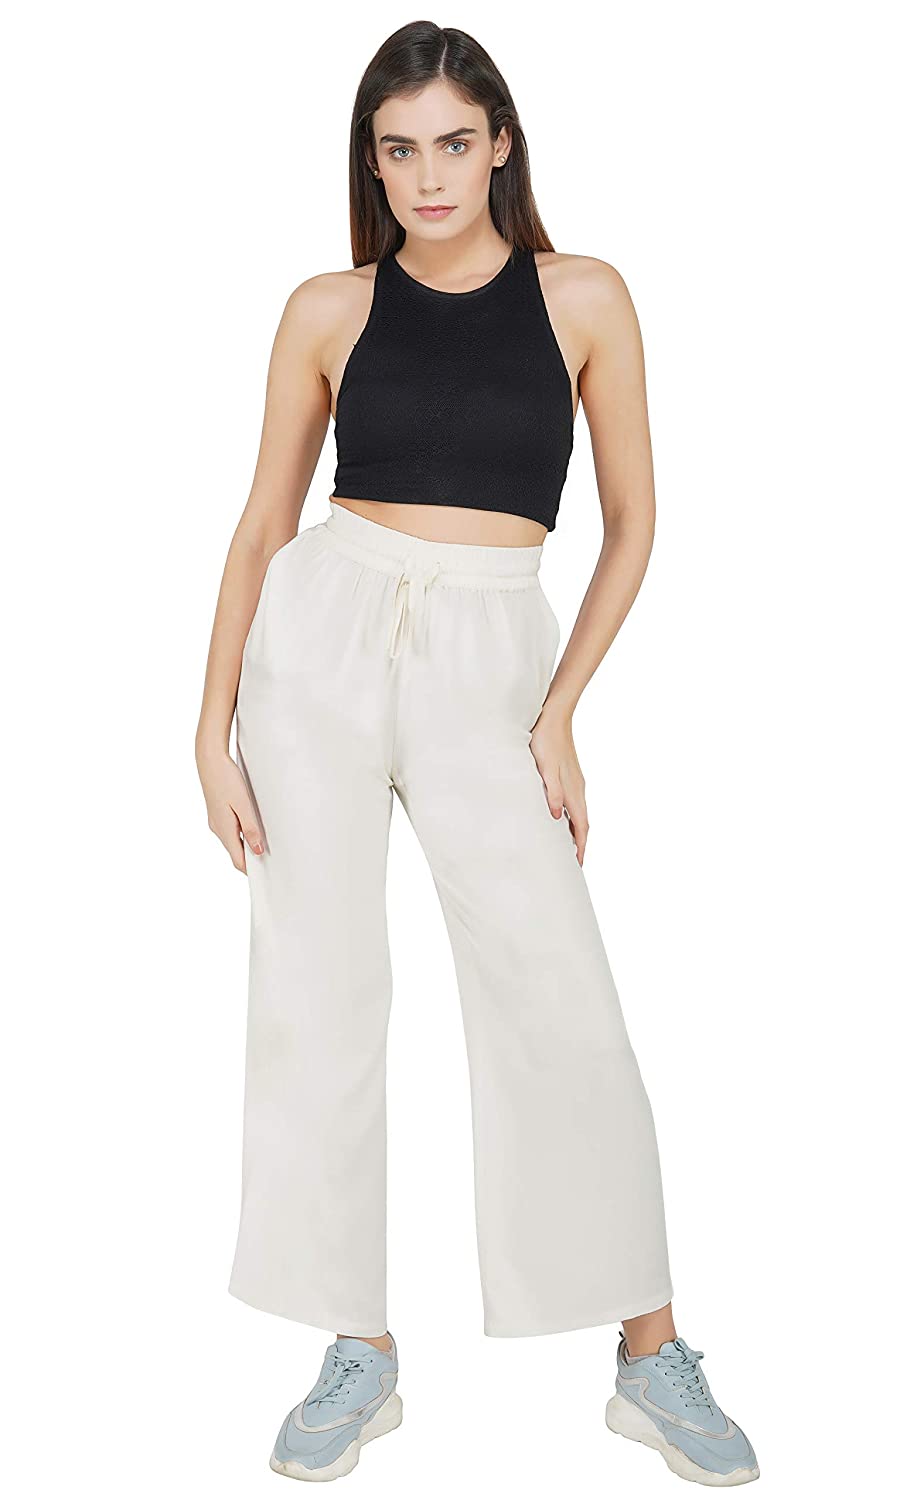 Spanx's New White Pants Are Wide-Leg and Totally Opaque